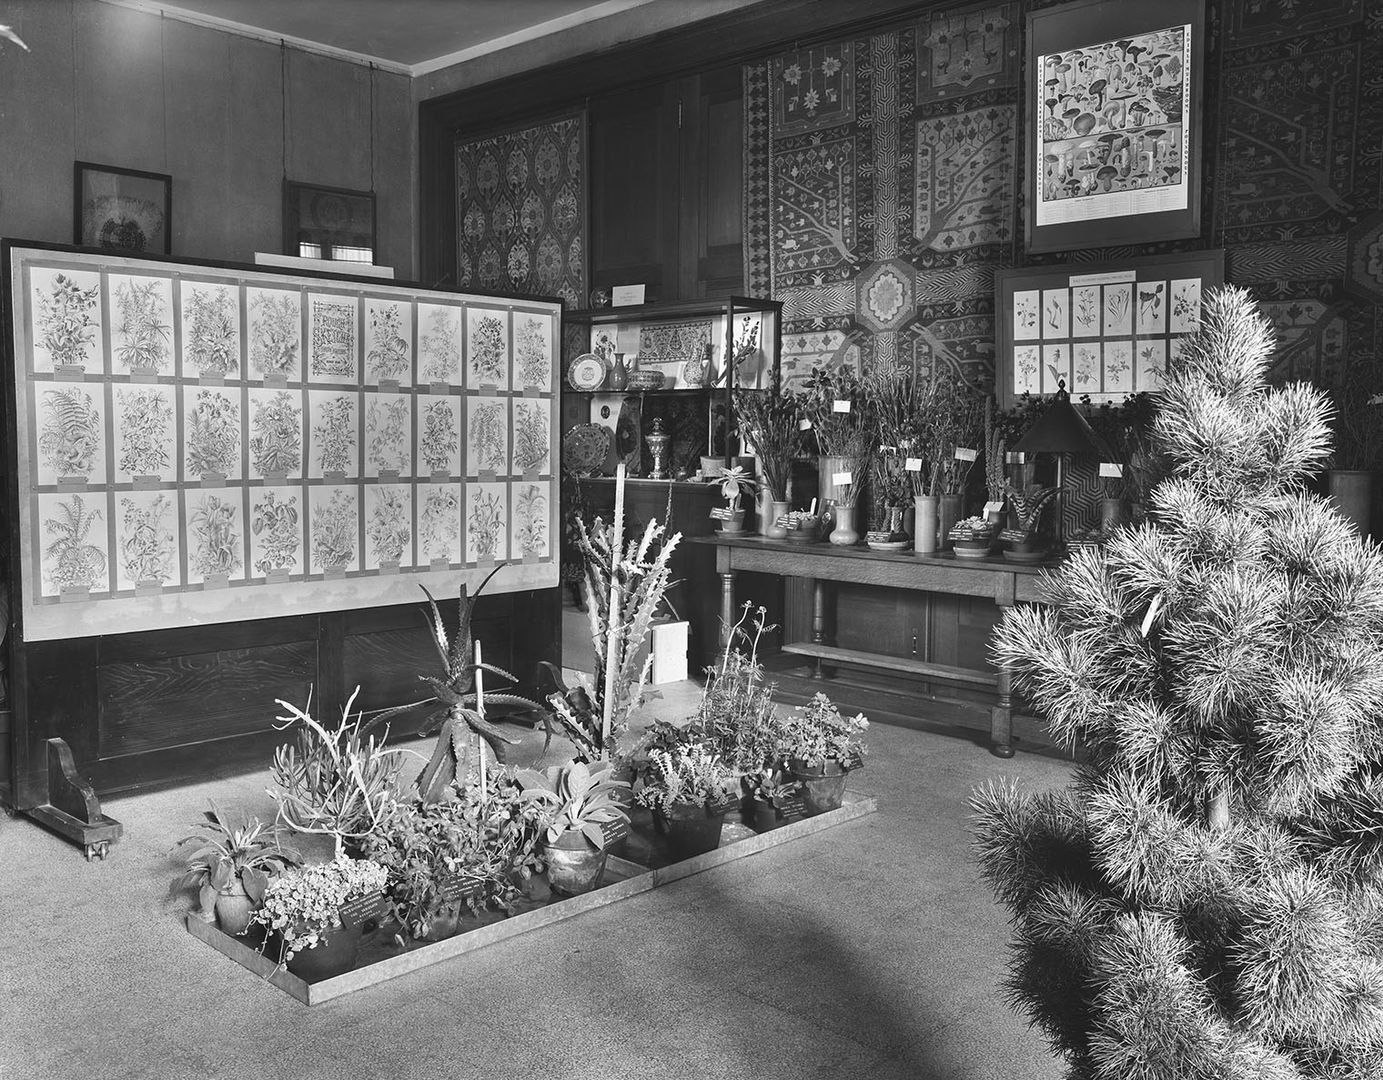 A black and white photograph of a gallery filled with plants.